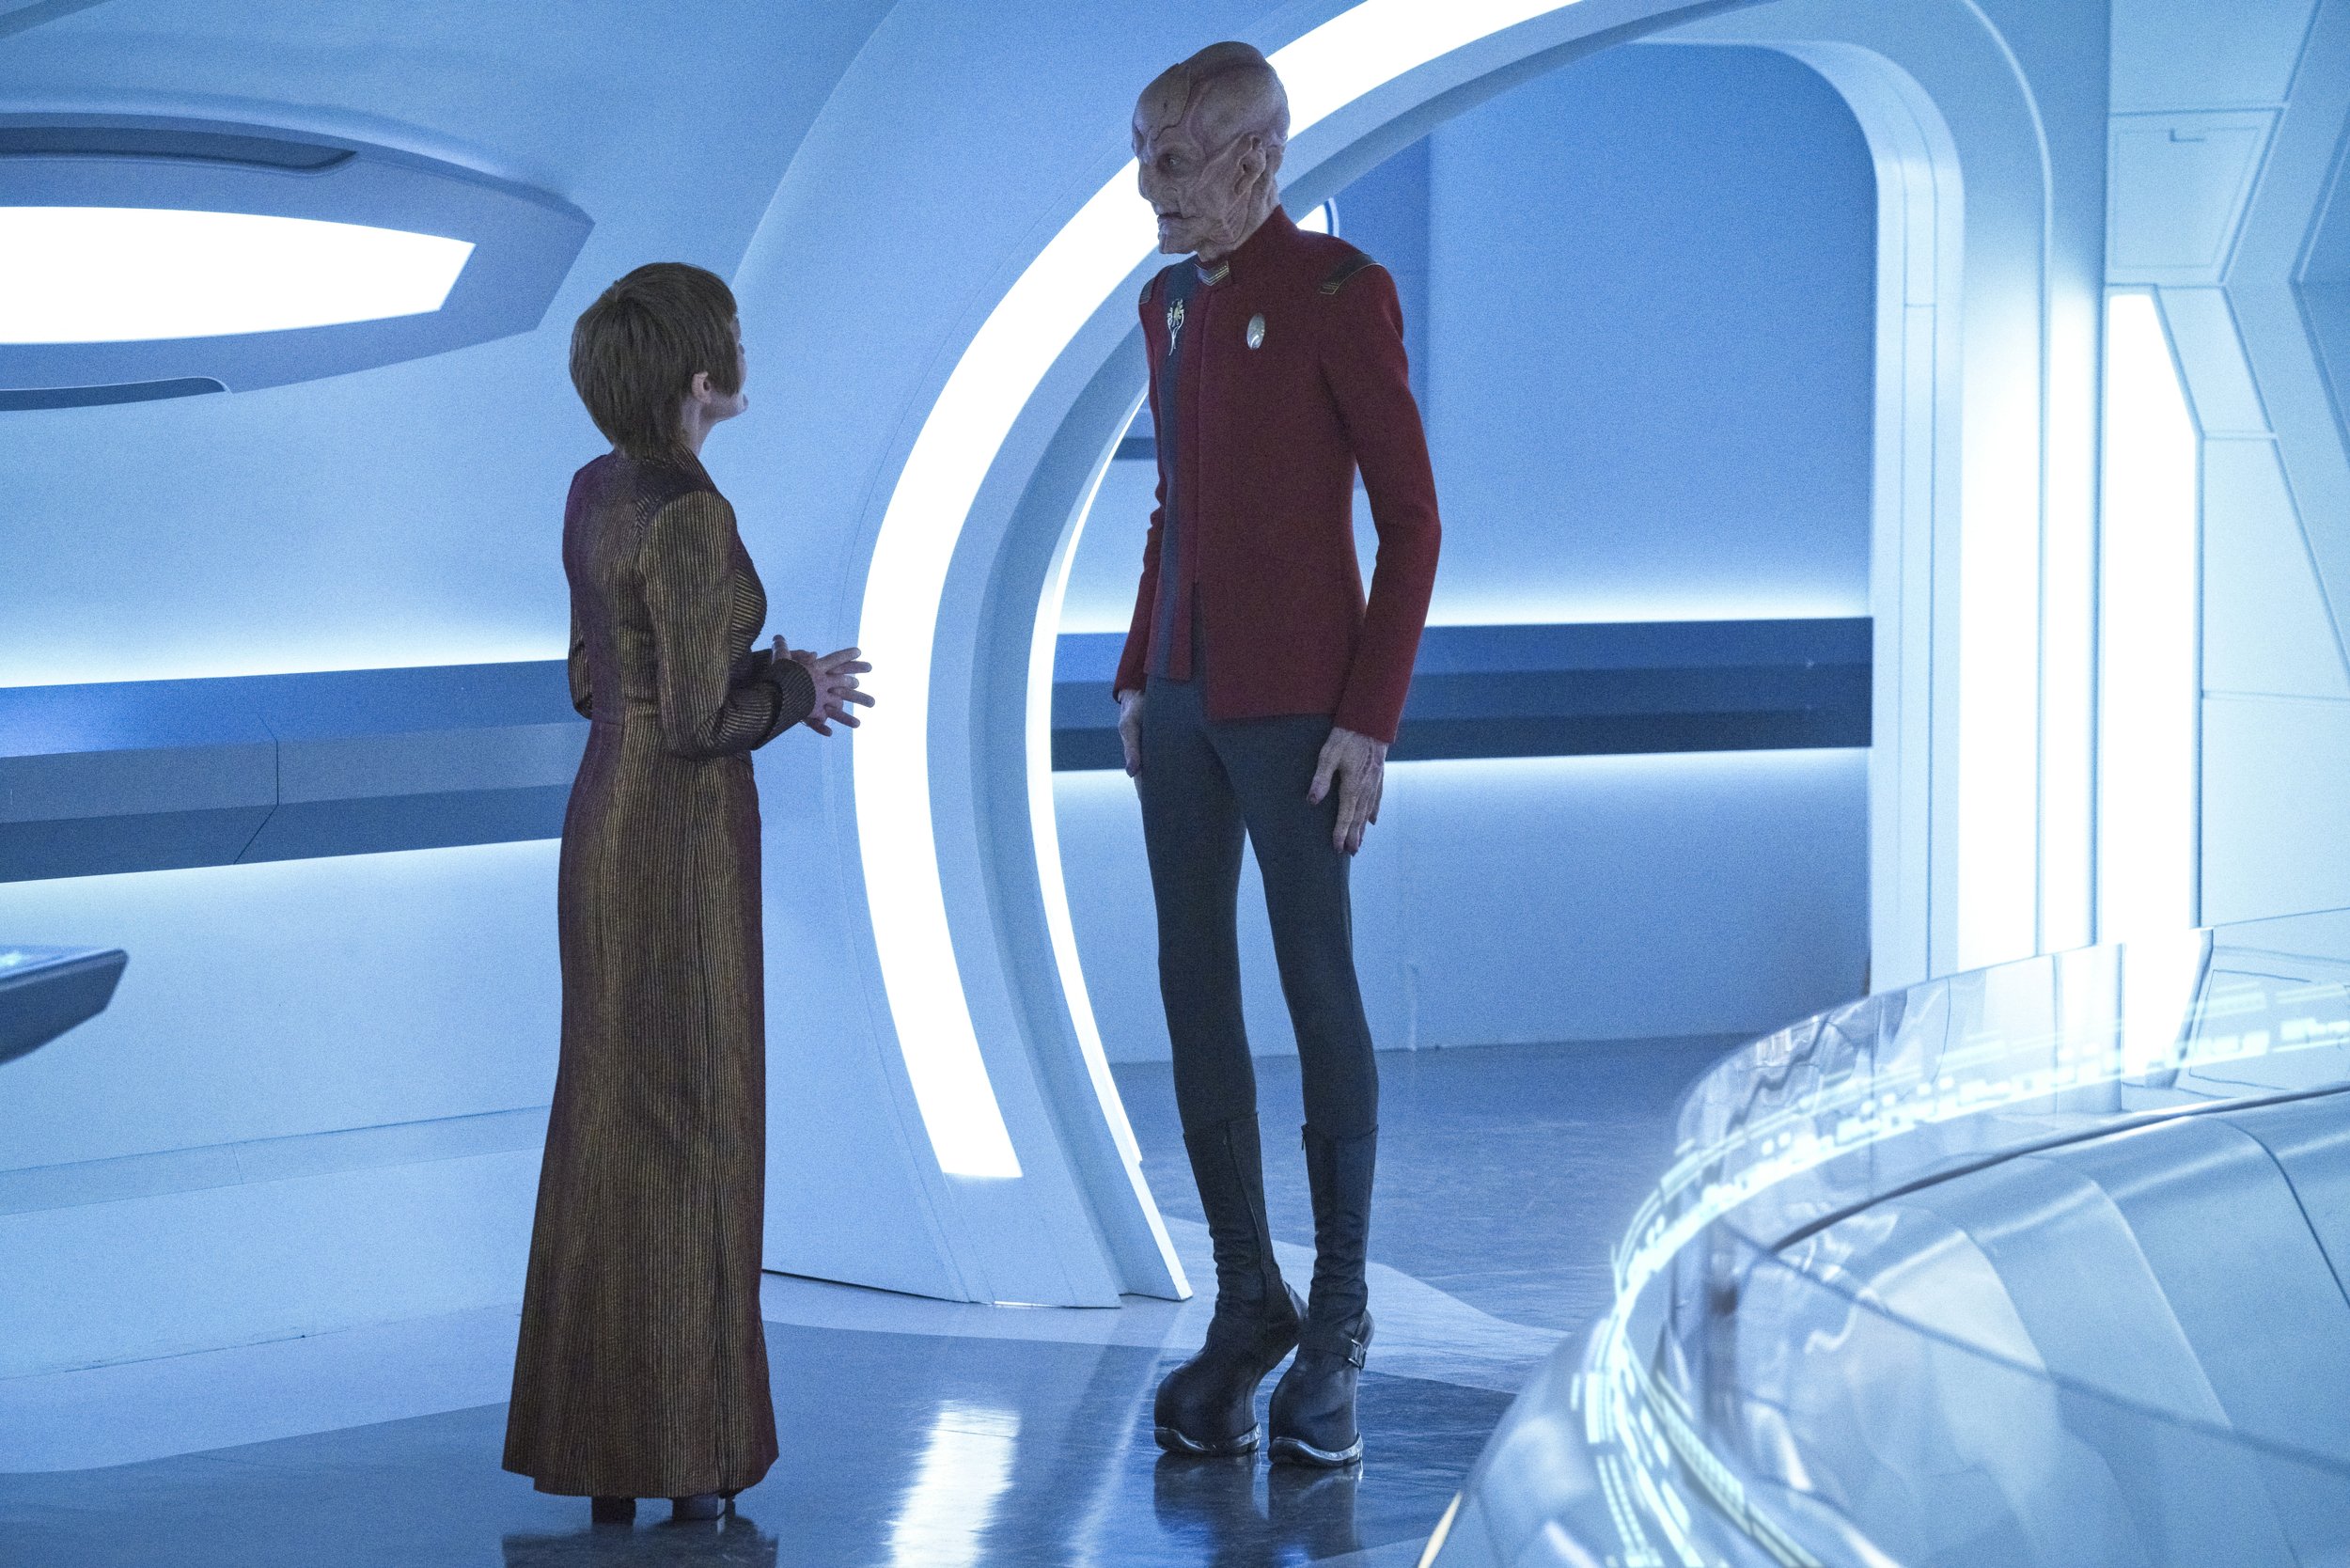   Pictured: Tara Rosling as T'Rina and Doug Jones as Saru of the Paramount+ original series STAR TREK: DISCOVERY. Photo Cr: Michael Gibson/Paramount+ (C) 2021 CBS Interactive. All Rights Reserved.  